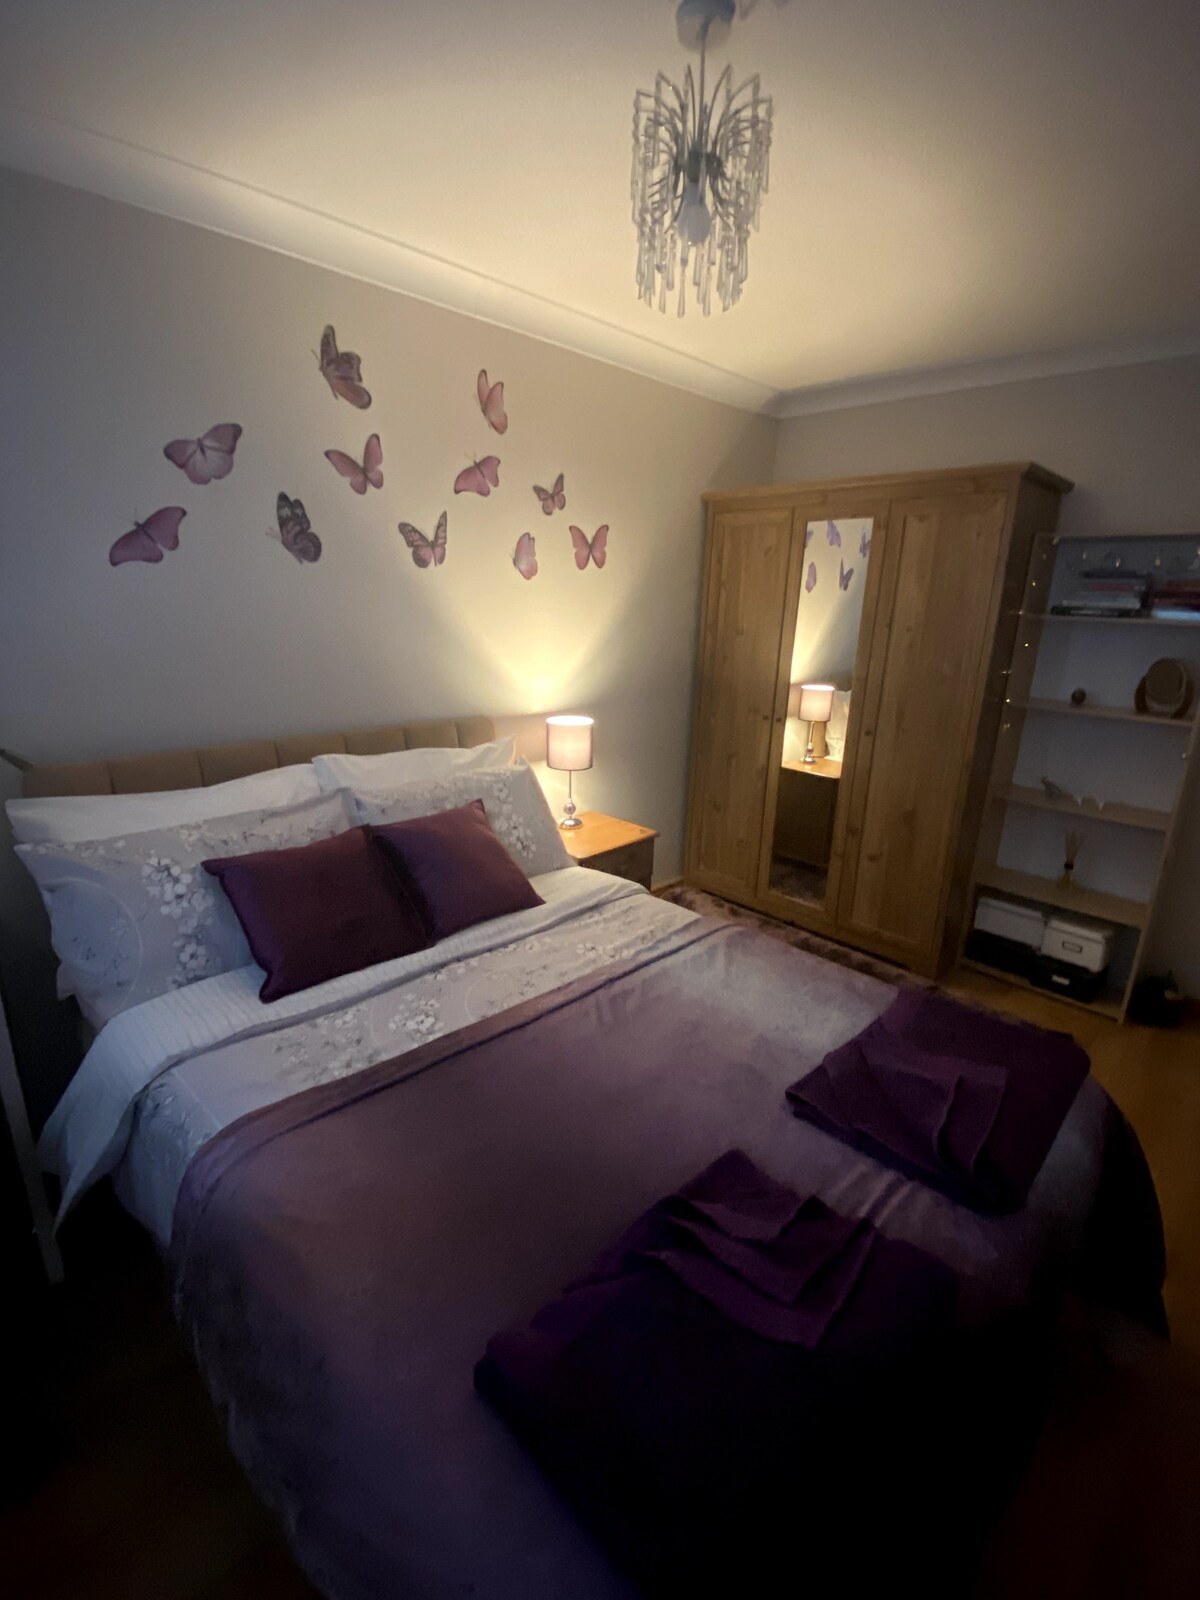 Purple Double Room with access to shared spaces.